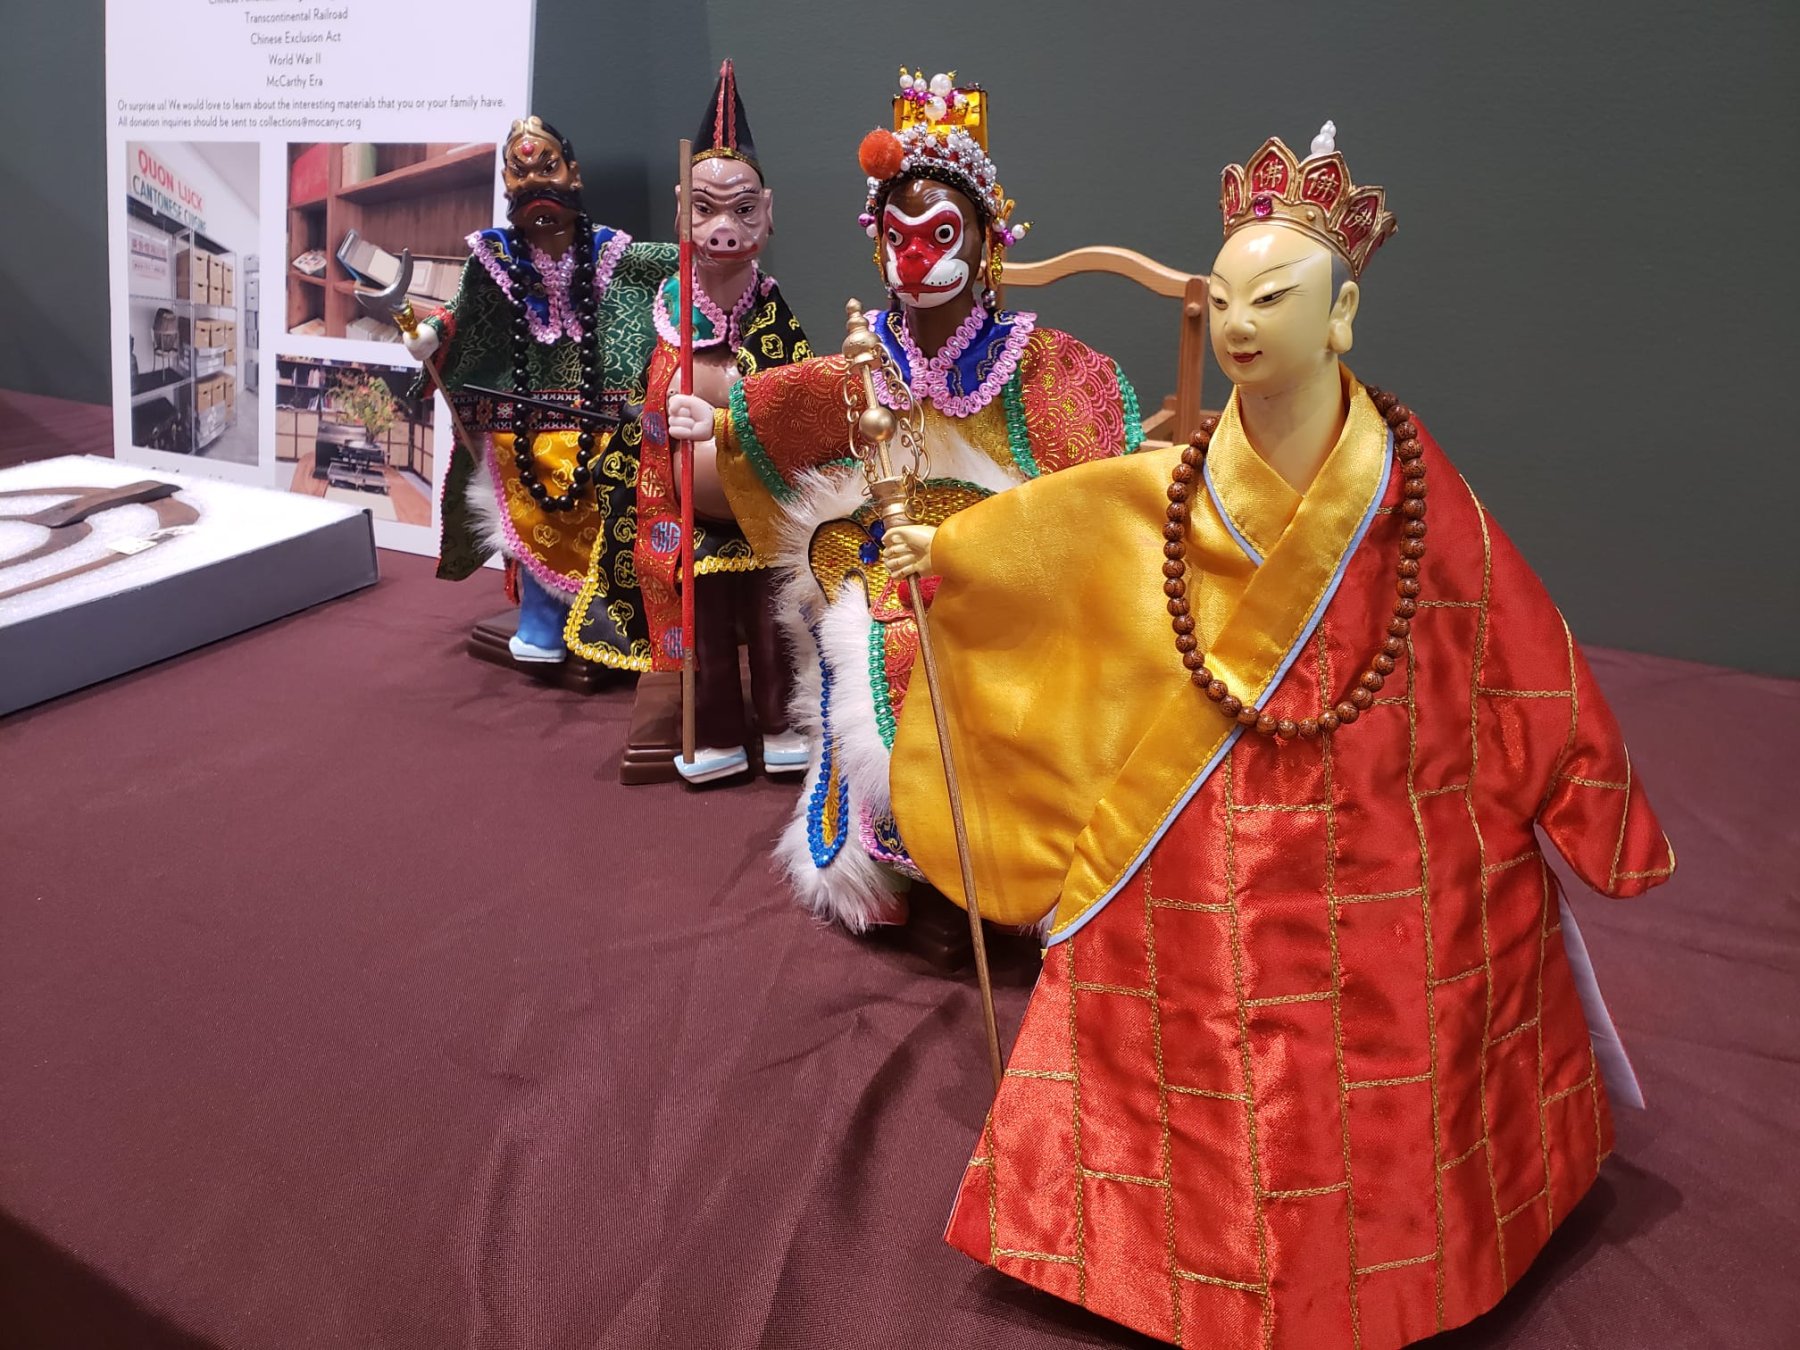 Journey to the West glove puppets. Courtesy of Steven Yungyuan Chang, Museum of Chinese in America (MOCA) Collection.